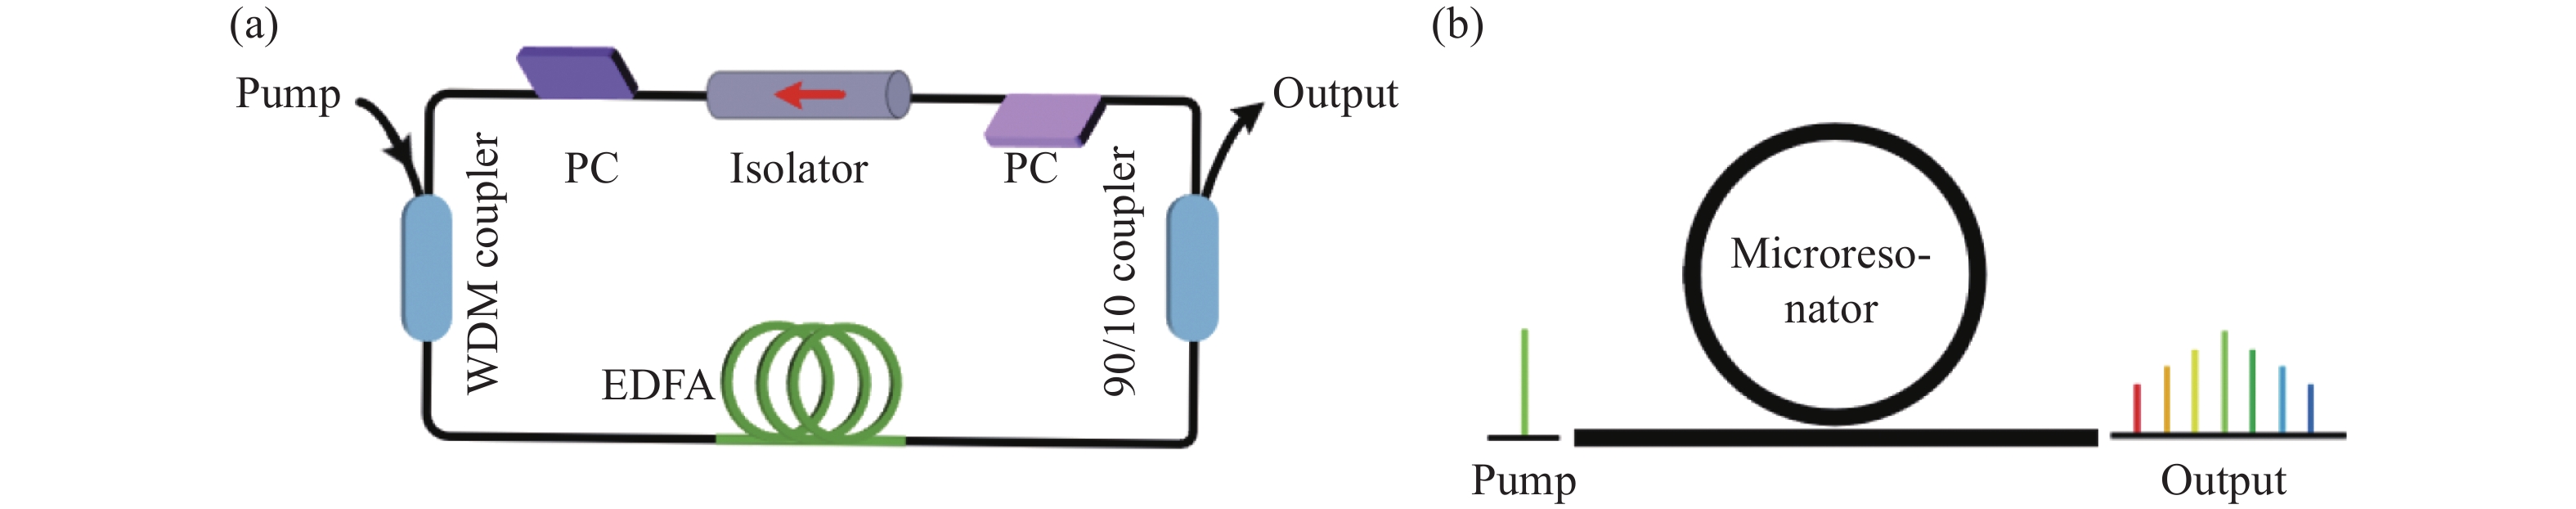 Schematic of optical frequency comb generators. (a) Typical self-starting mode-locked fiber laser; (b) On-chip optical frequency comb generation based on Kerr microresonators